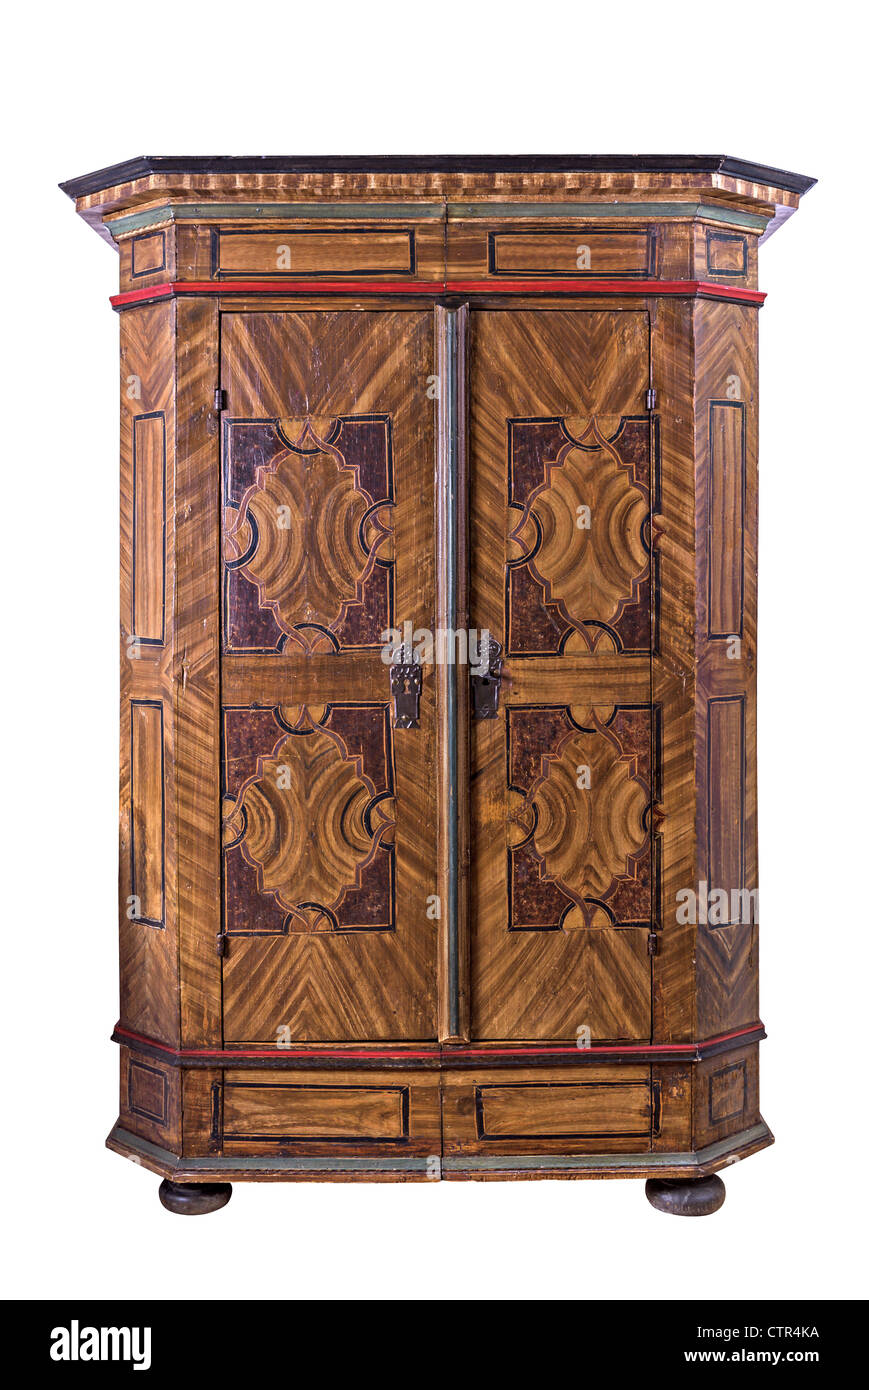 Antique painted wooden wardrobe Stock Photo